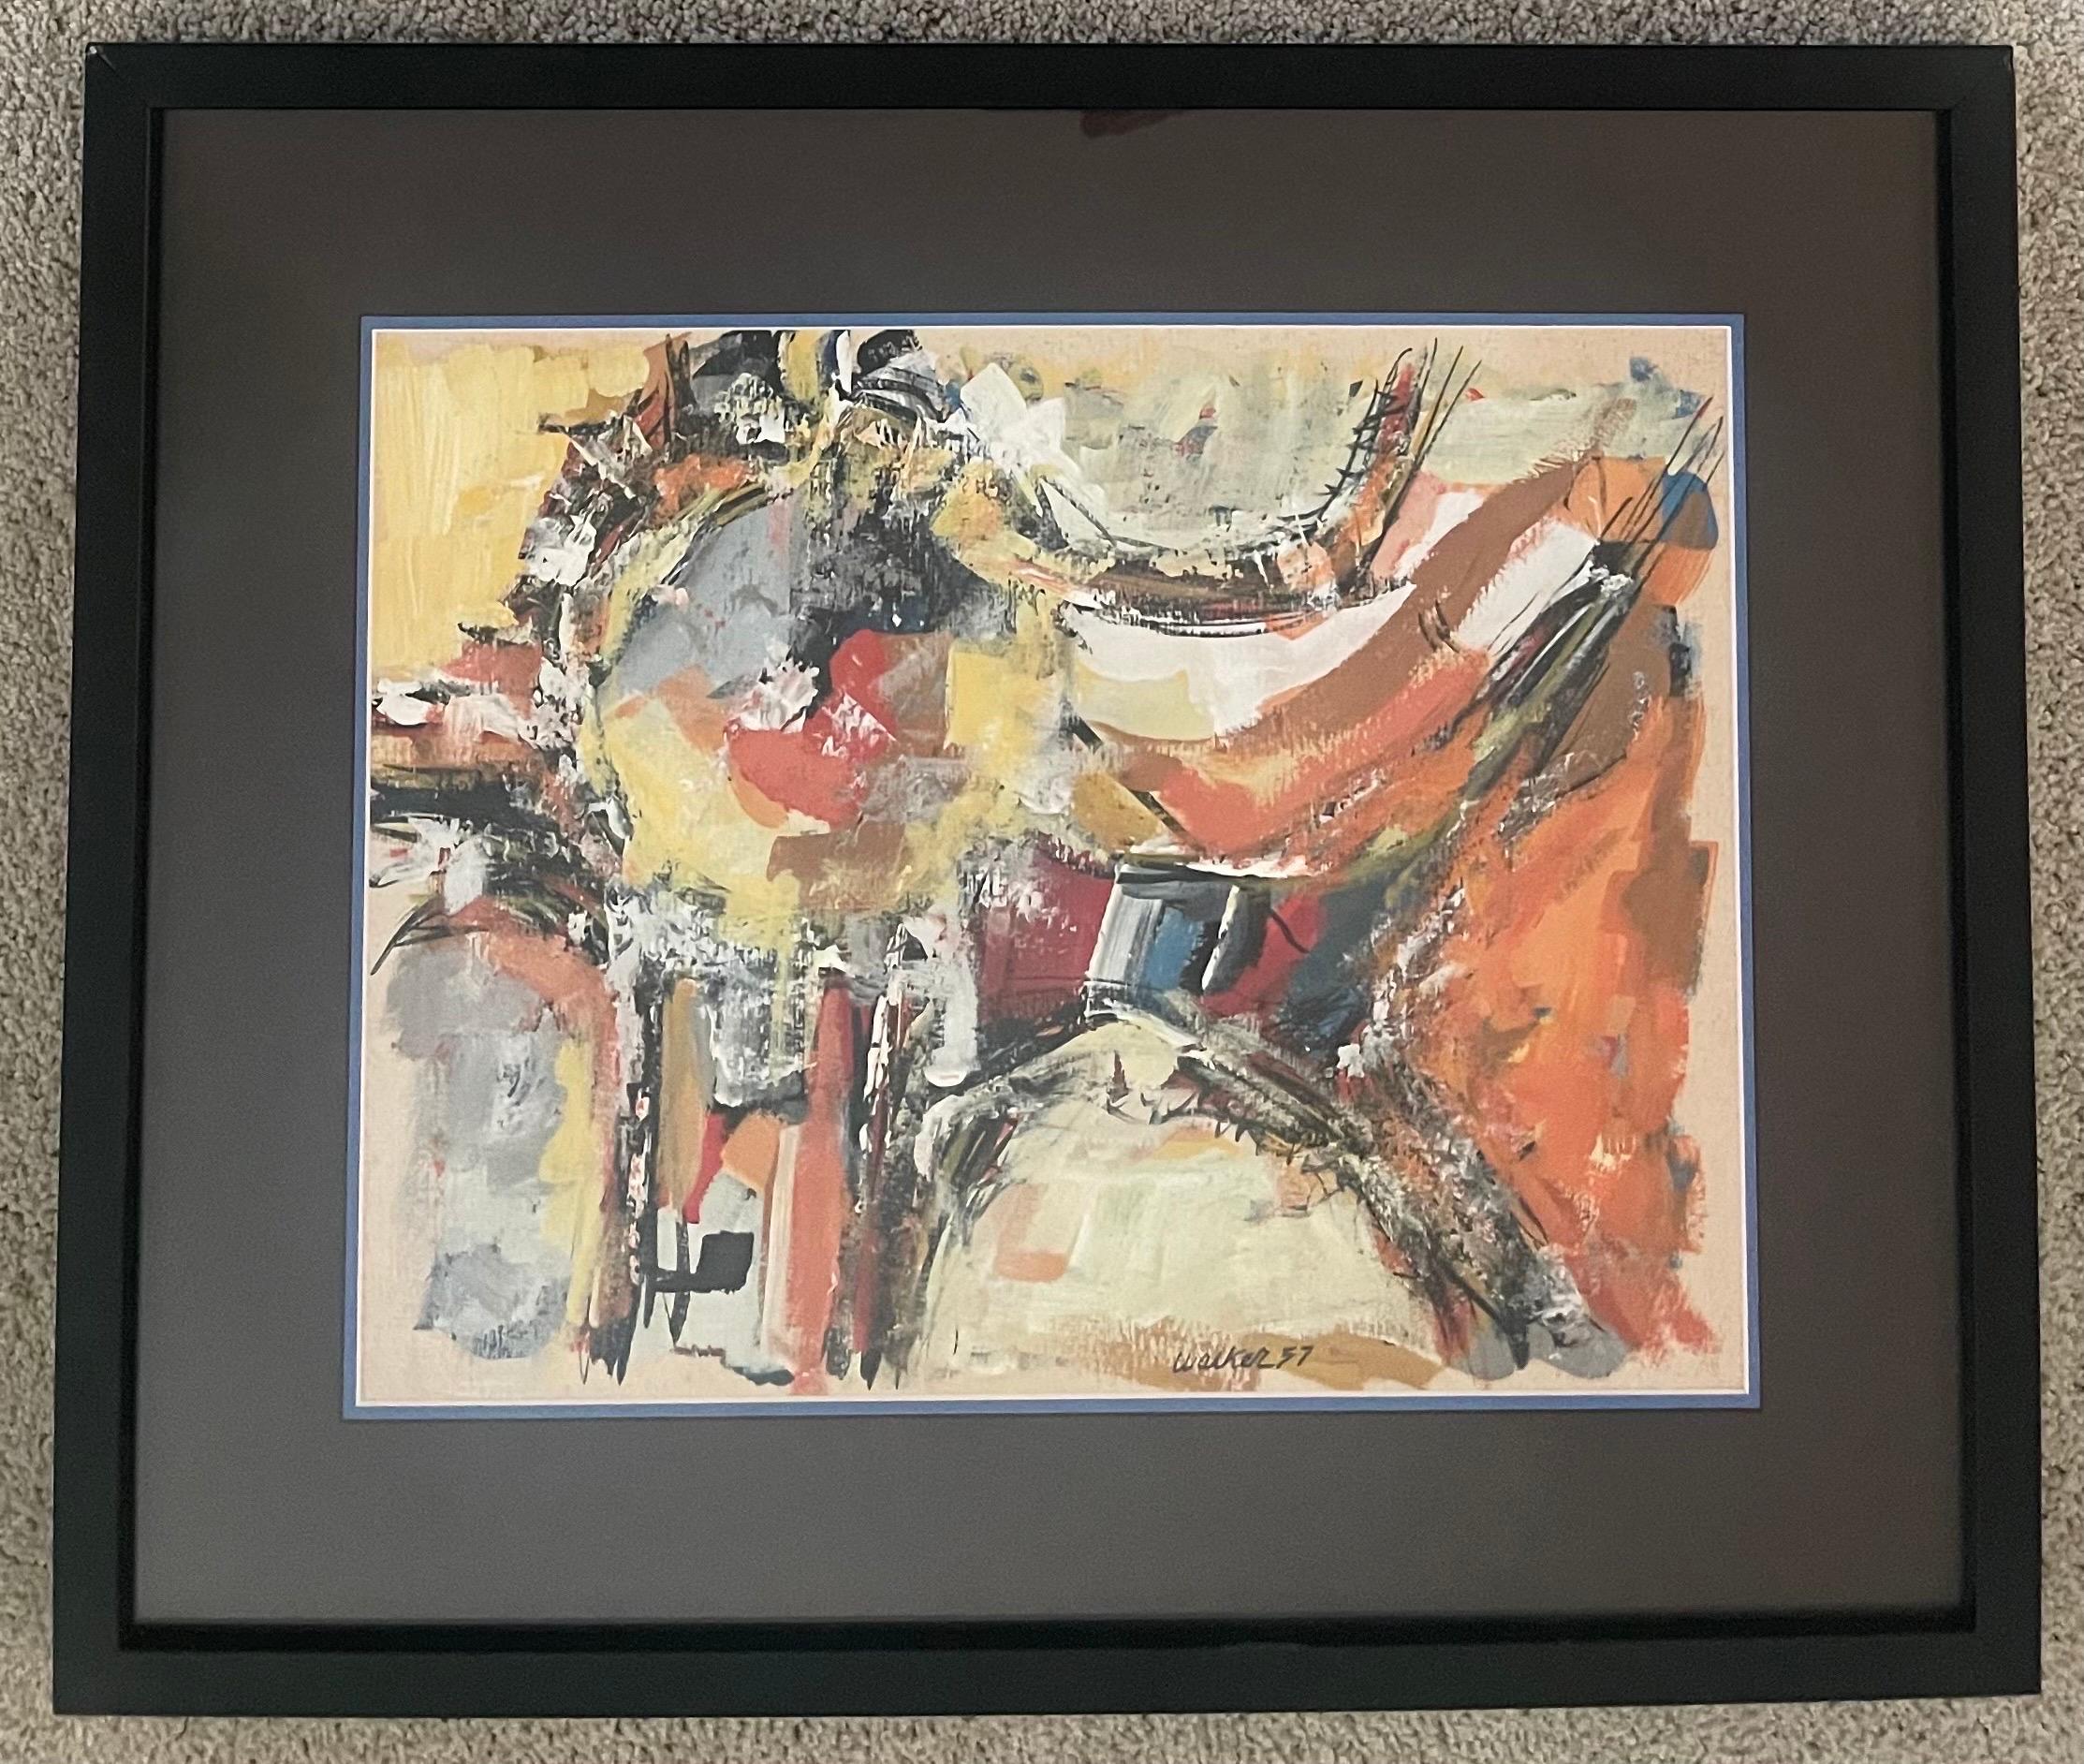 Original mid-century abstract oil painting by Clay Walker, circa 1957. The piece is in very good vintage condition and is presented in a black frame with black mat; the overall dimensions of the piece are 19.5